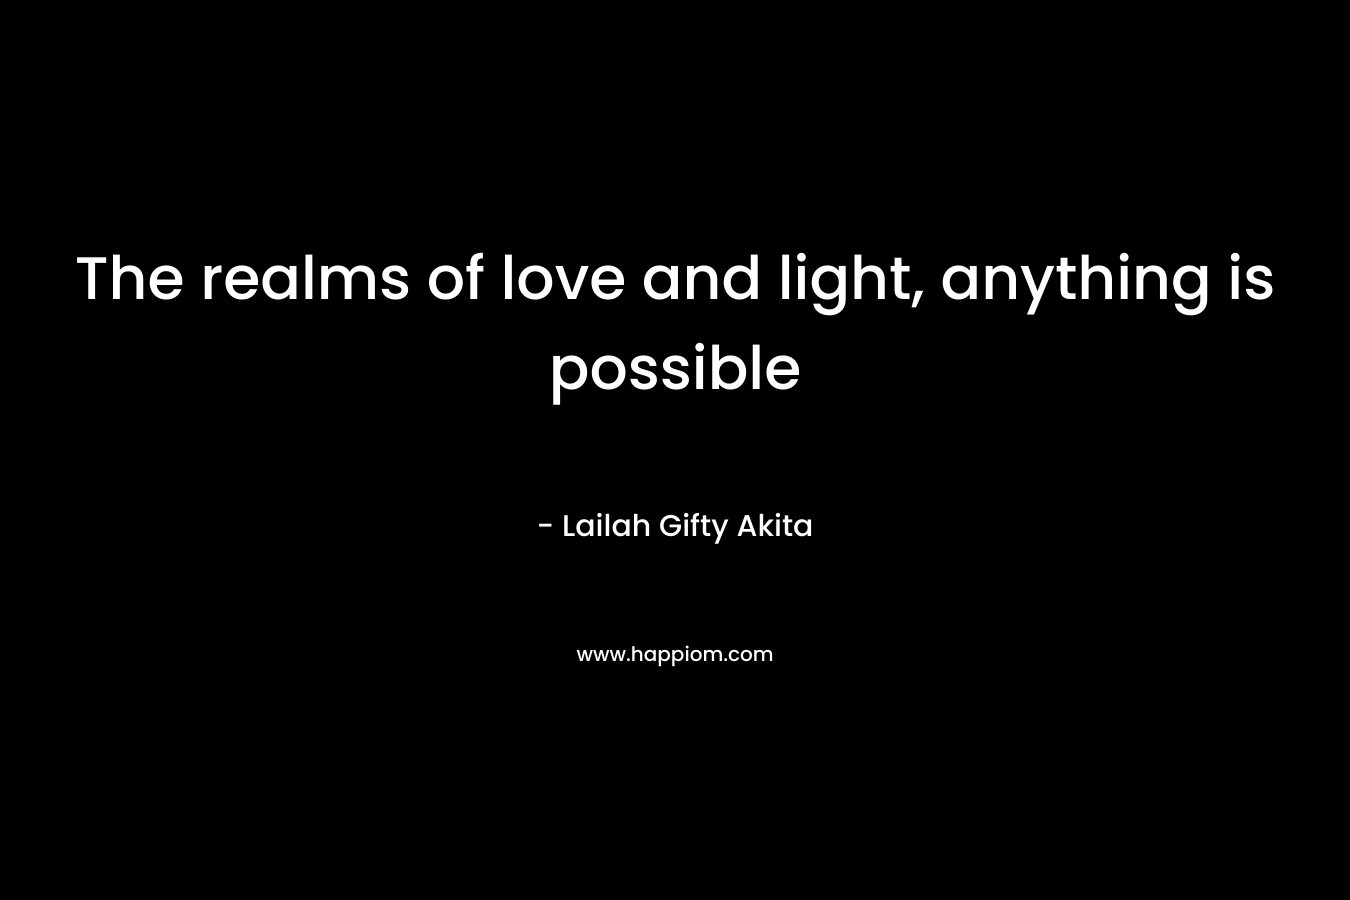 The realms of love and light, anything is possible